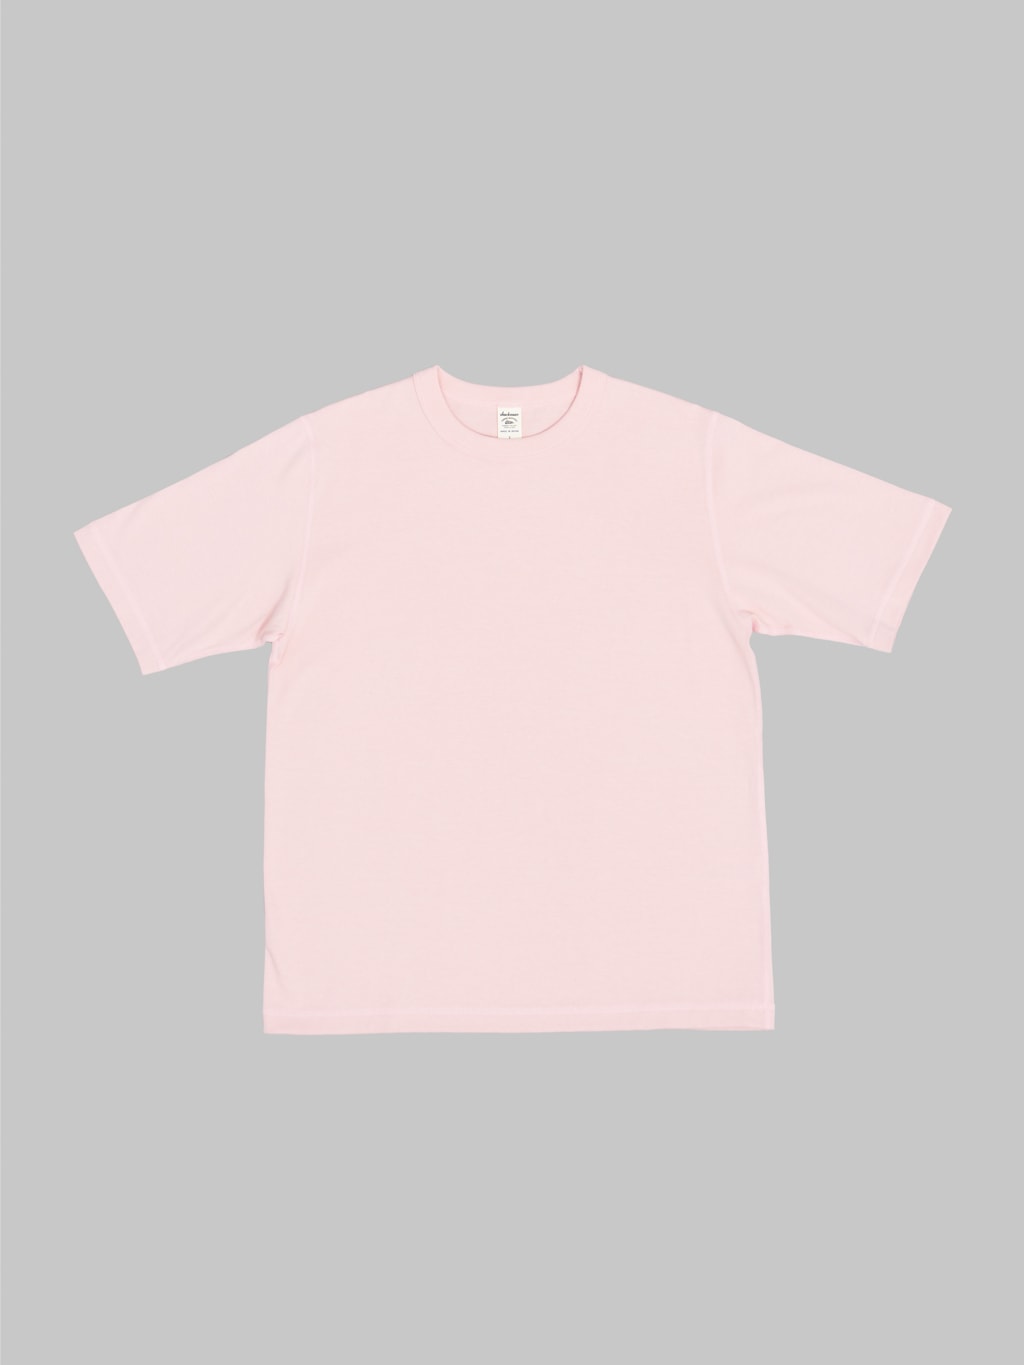 jackman grace tshirt baby pink  front